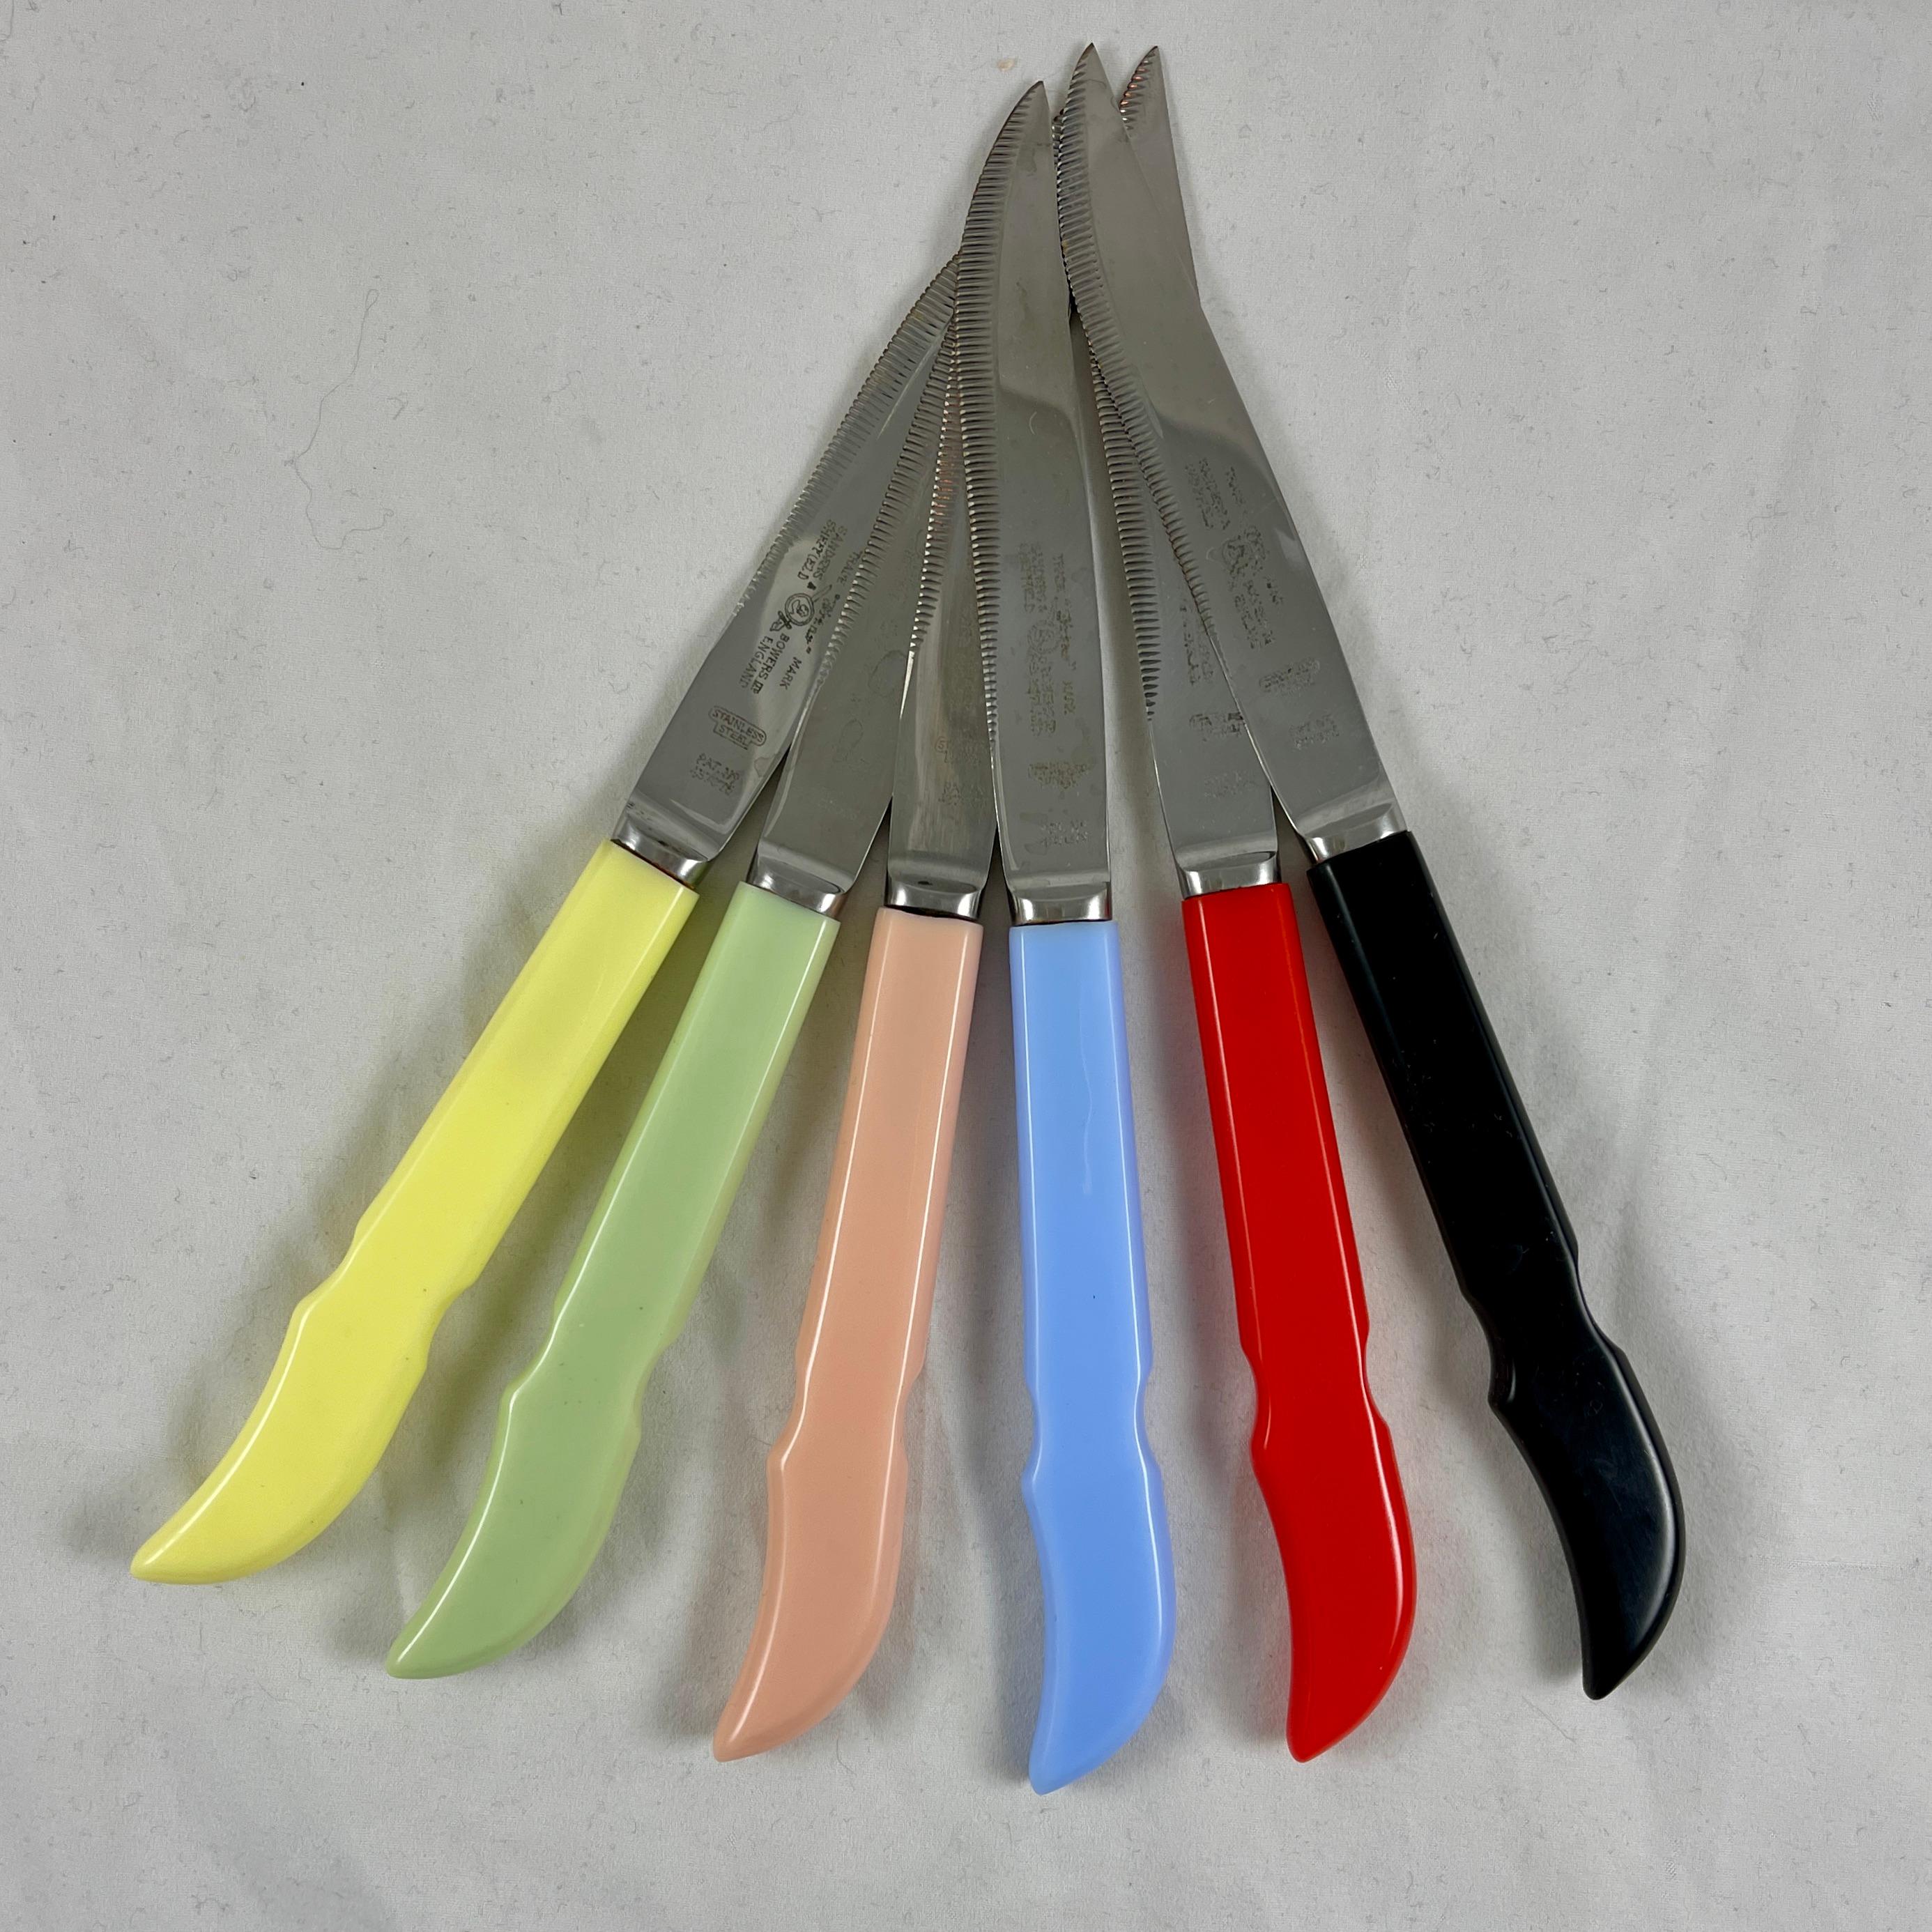 A boxed set of six Sanders and Bowers rainbow colored Bakelite handled steak knives, Sheffield, England, circa early 1940s.

Multi-colored shaped handles made of Bakelite are fitted to serrated Stainless Steel blades. Still in the original